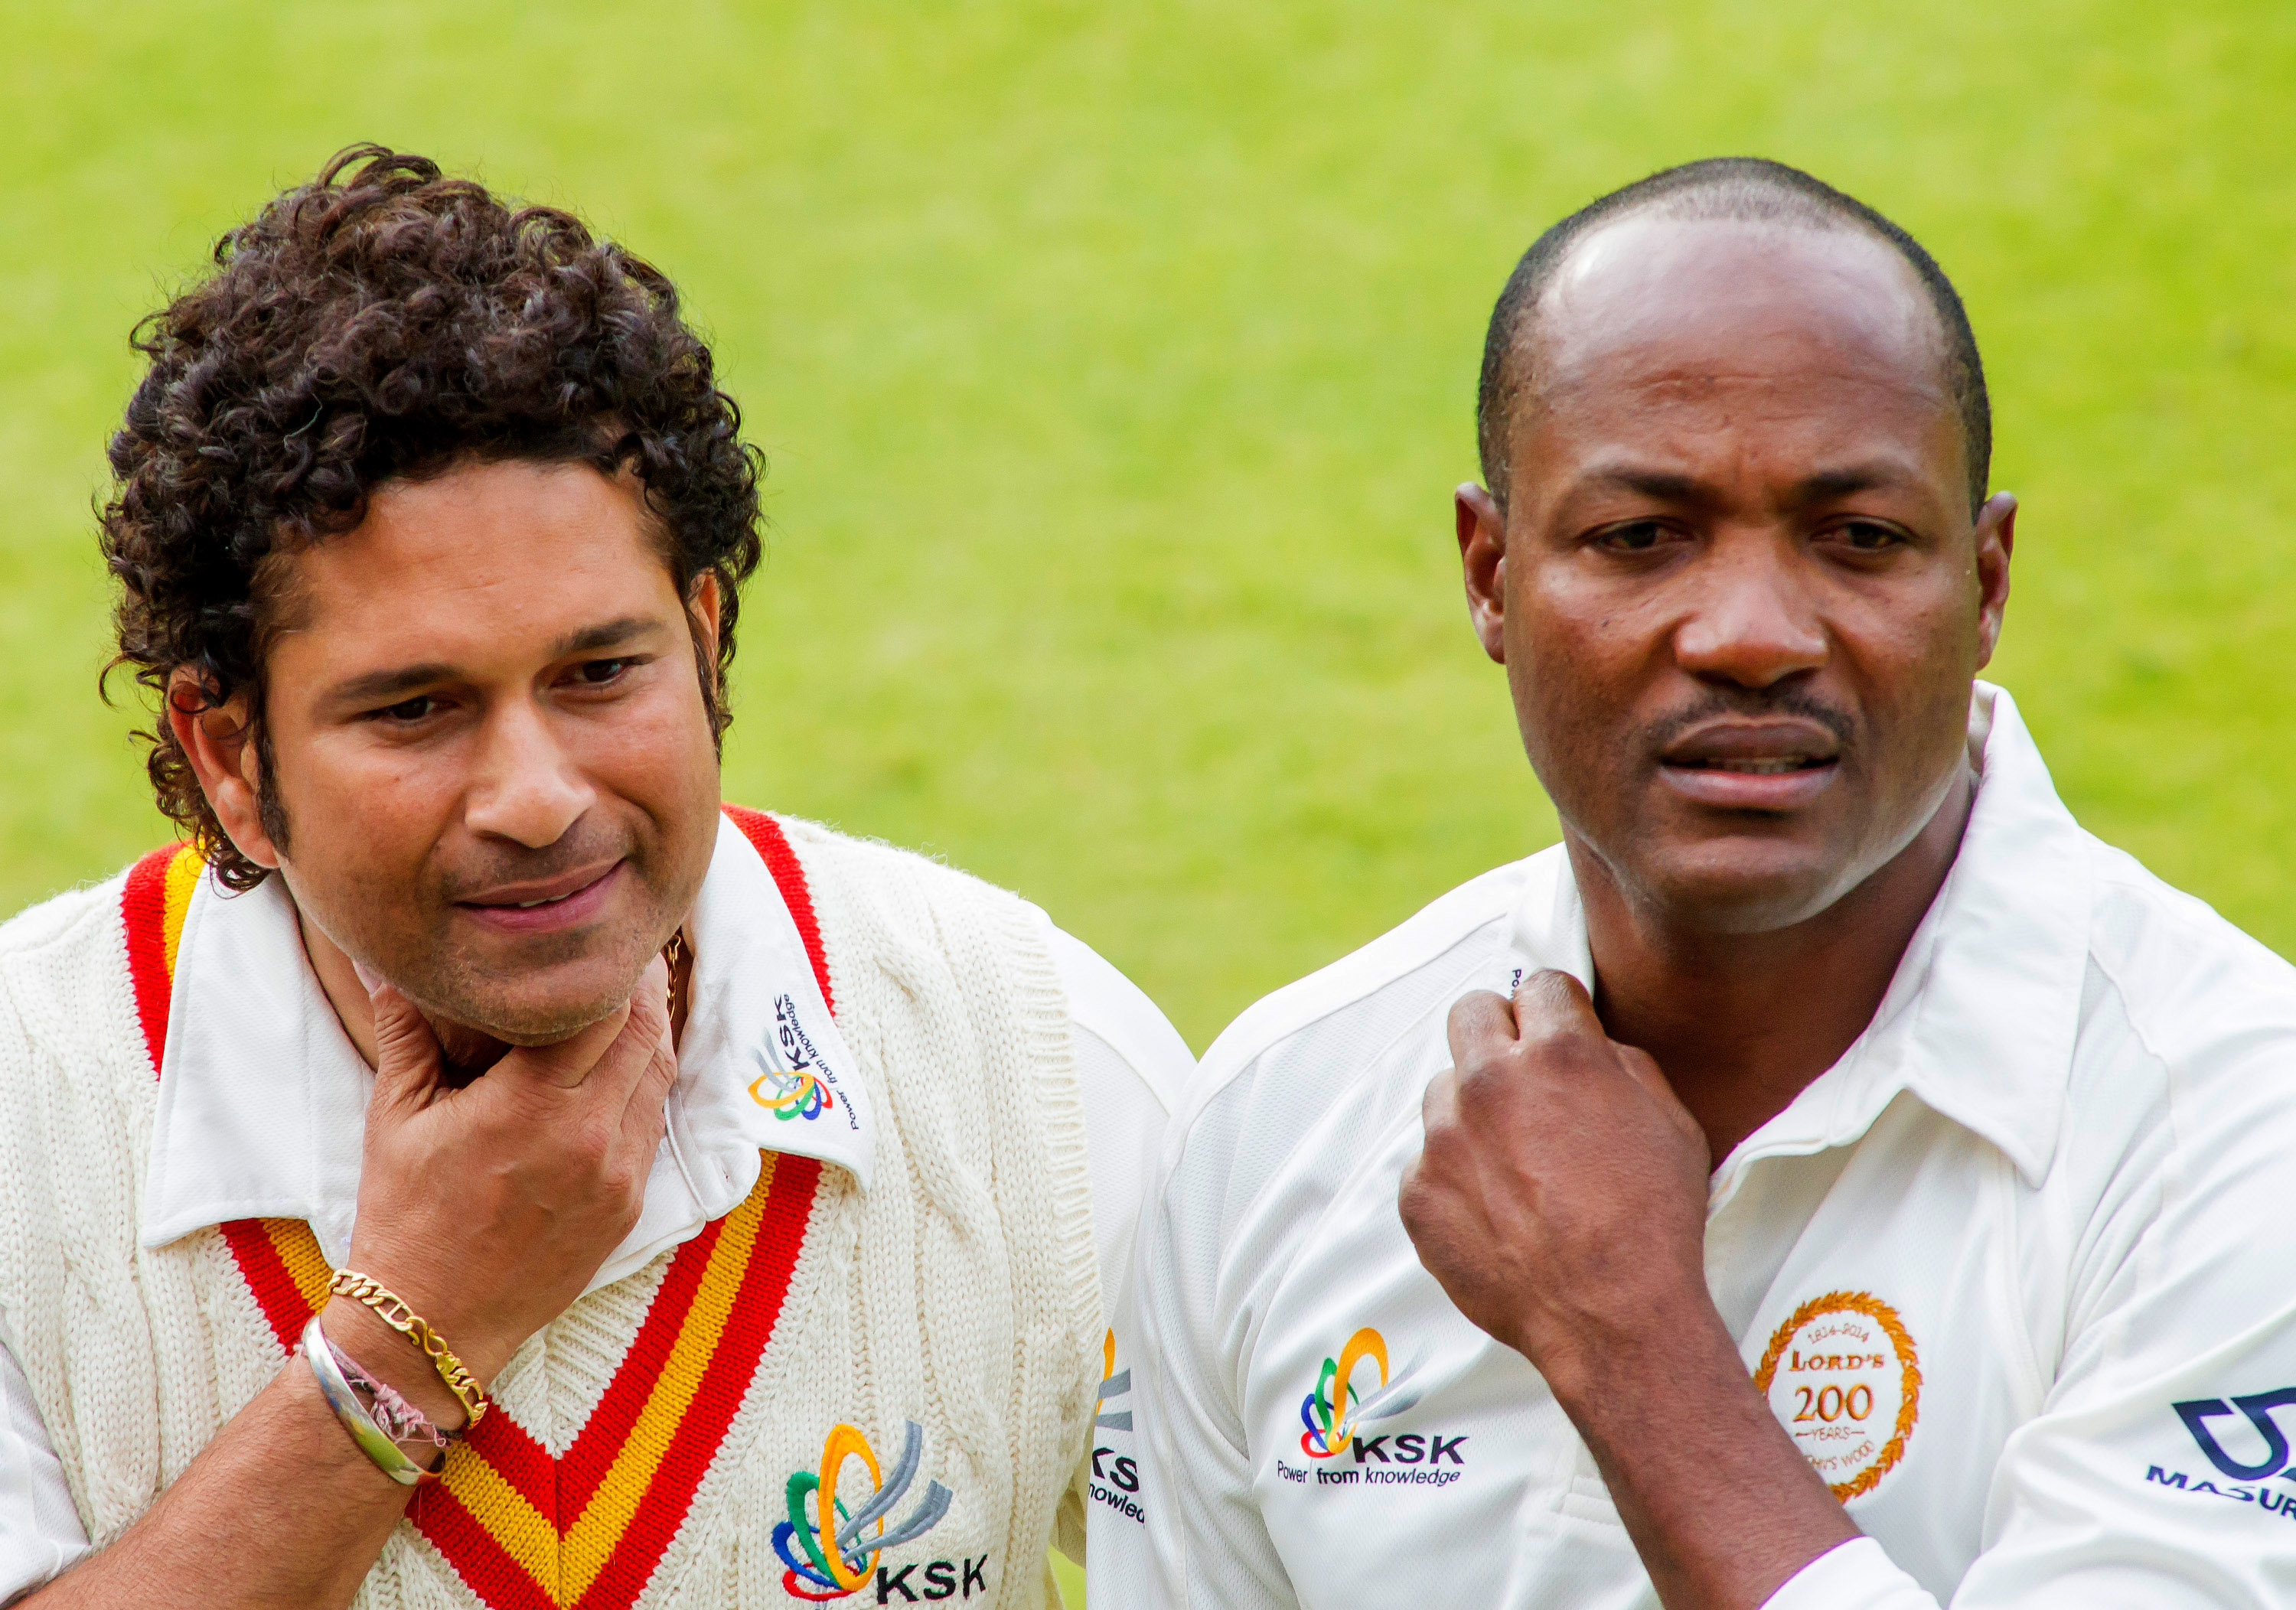 Sachin Tendulkar of India, left, and Brian Lara of the West Indies during a match at Lords Cricket Ground in London on July 5, 2014 (Mitchell Gunn—Getty Images)